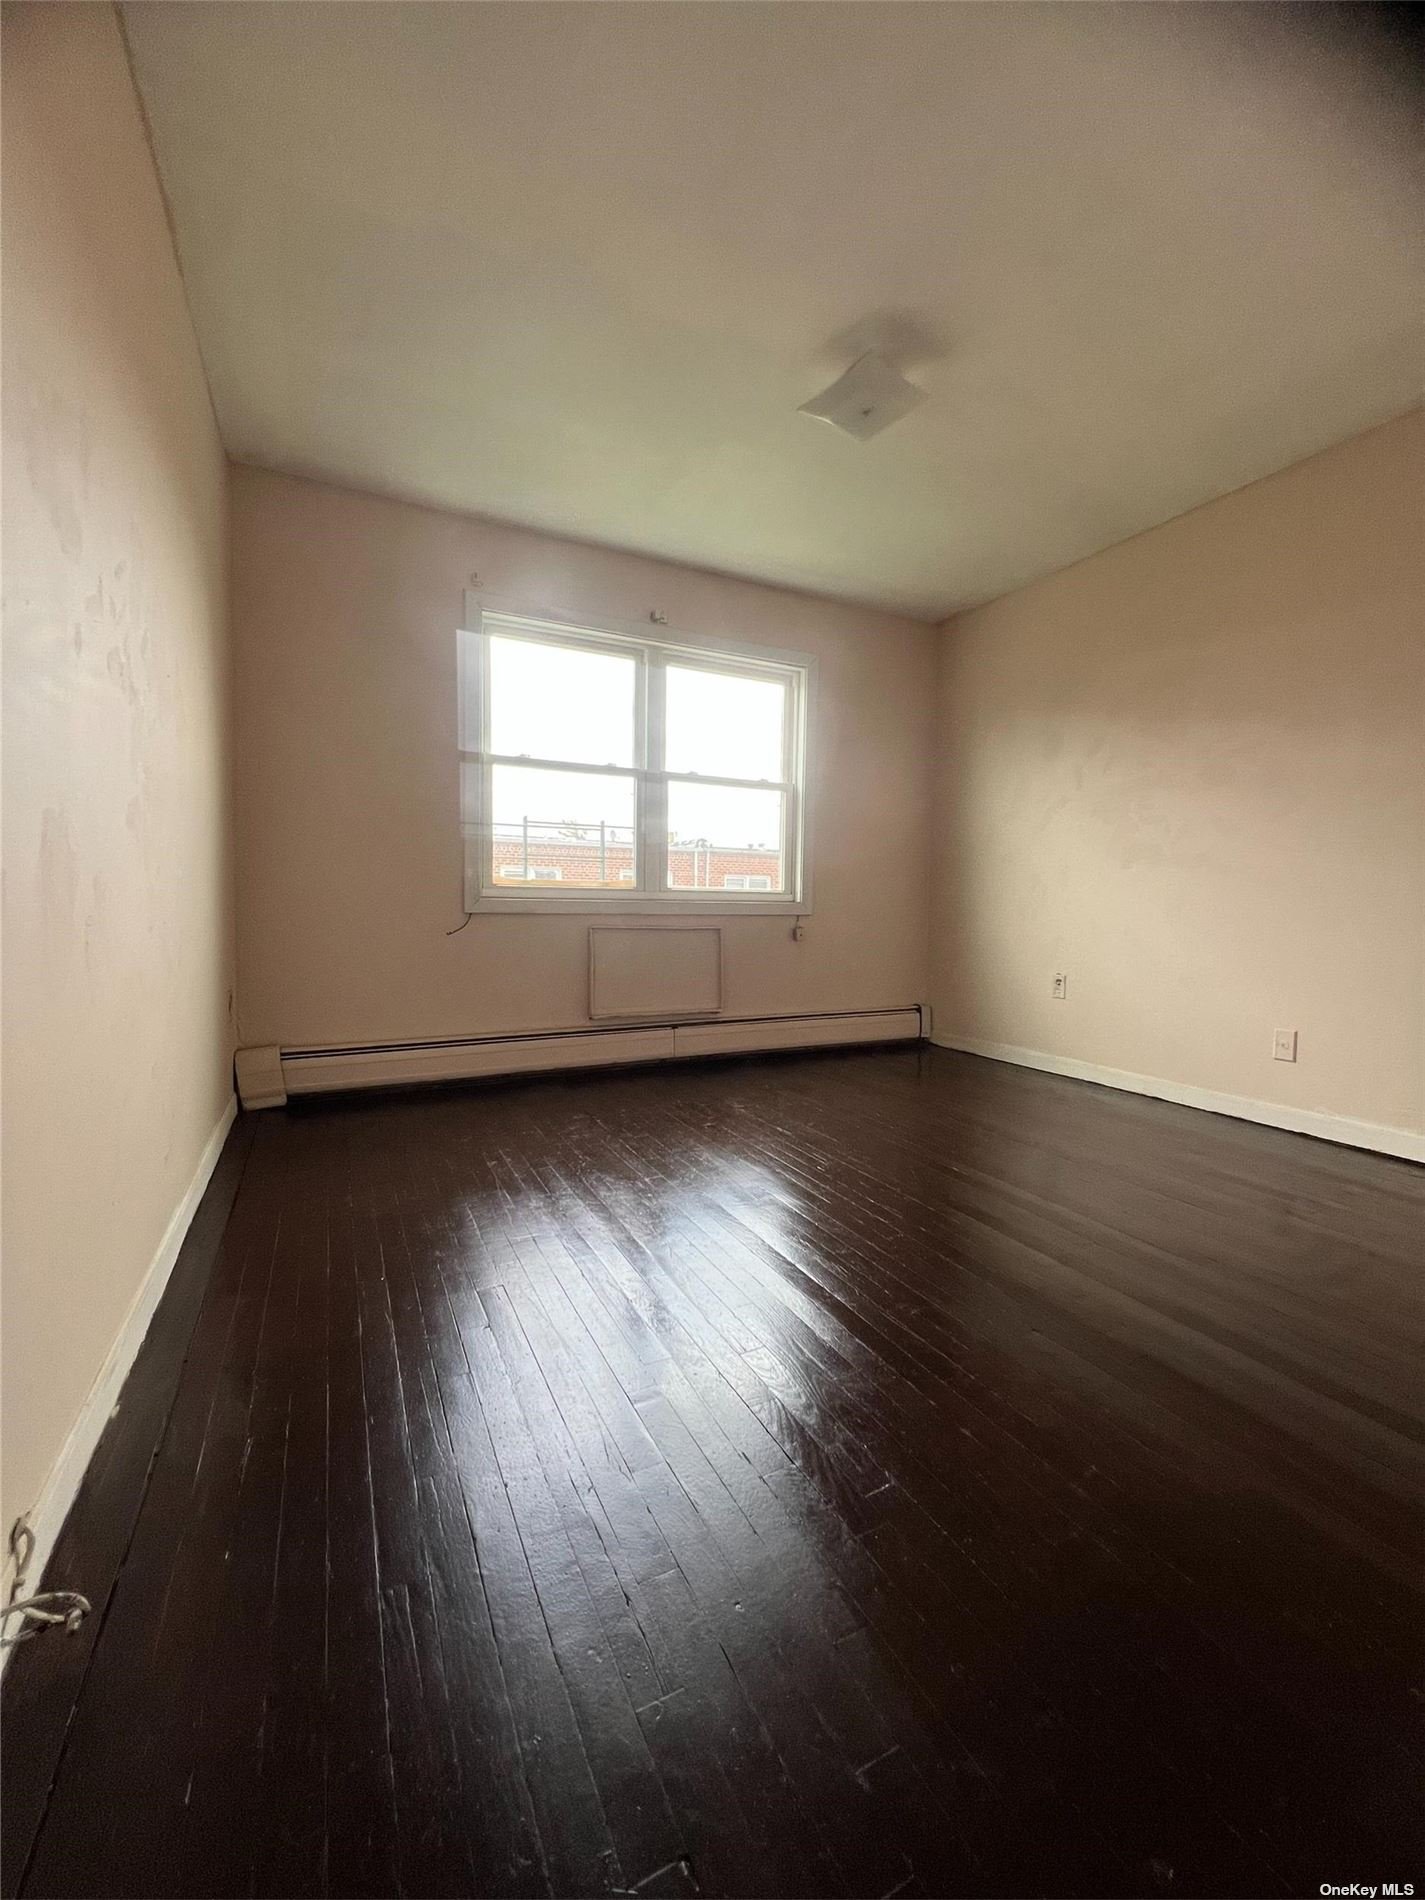 Apartment 103rd St  Queens, NY 11416, MLS-3499954-8